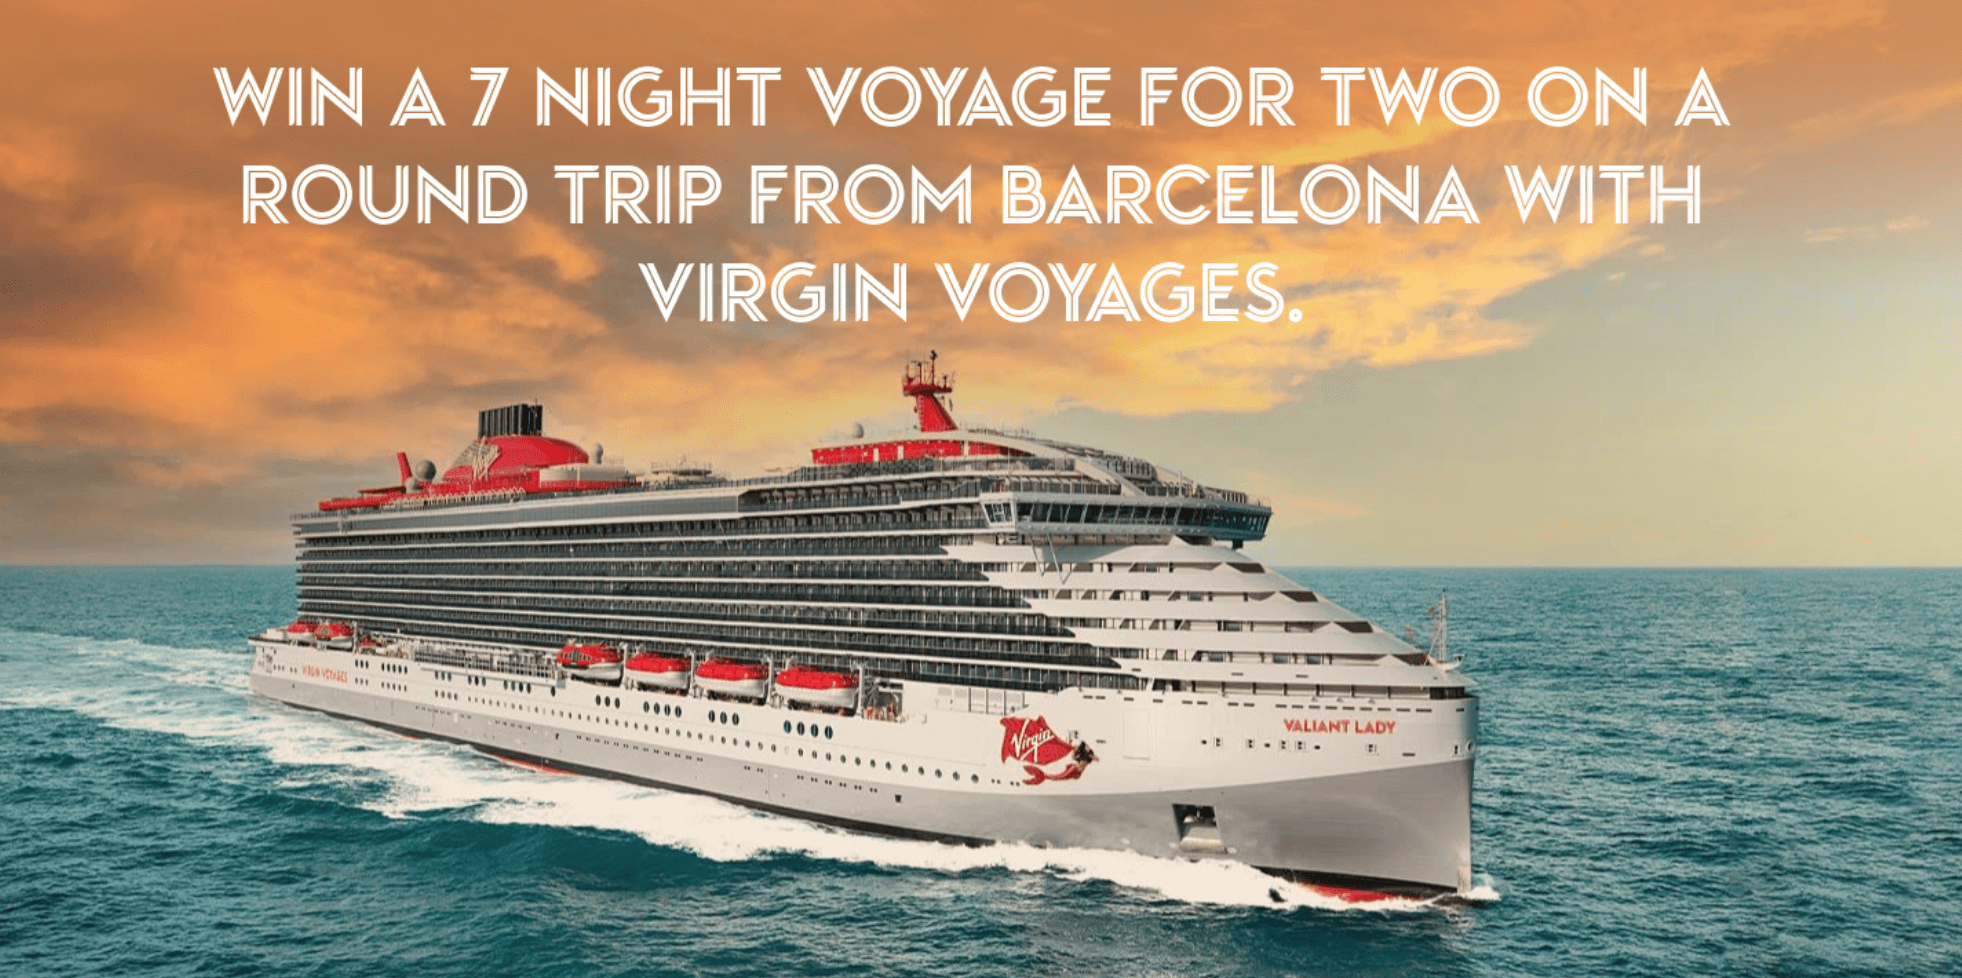 Win a Mediterranean cruise for two with Virgin Voyages and Metro